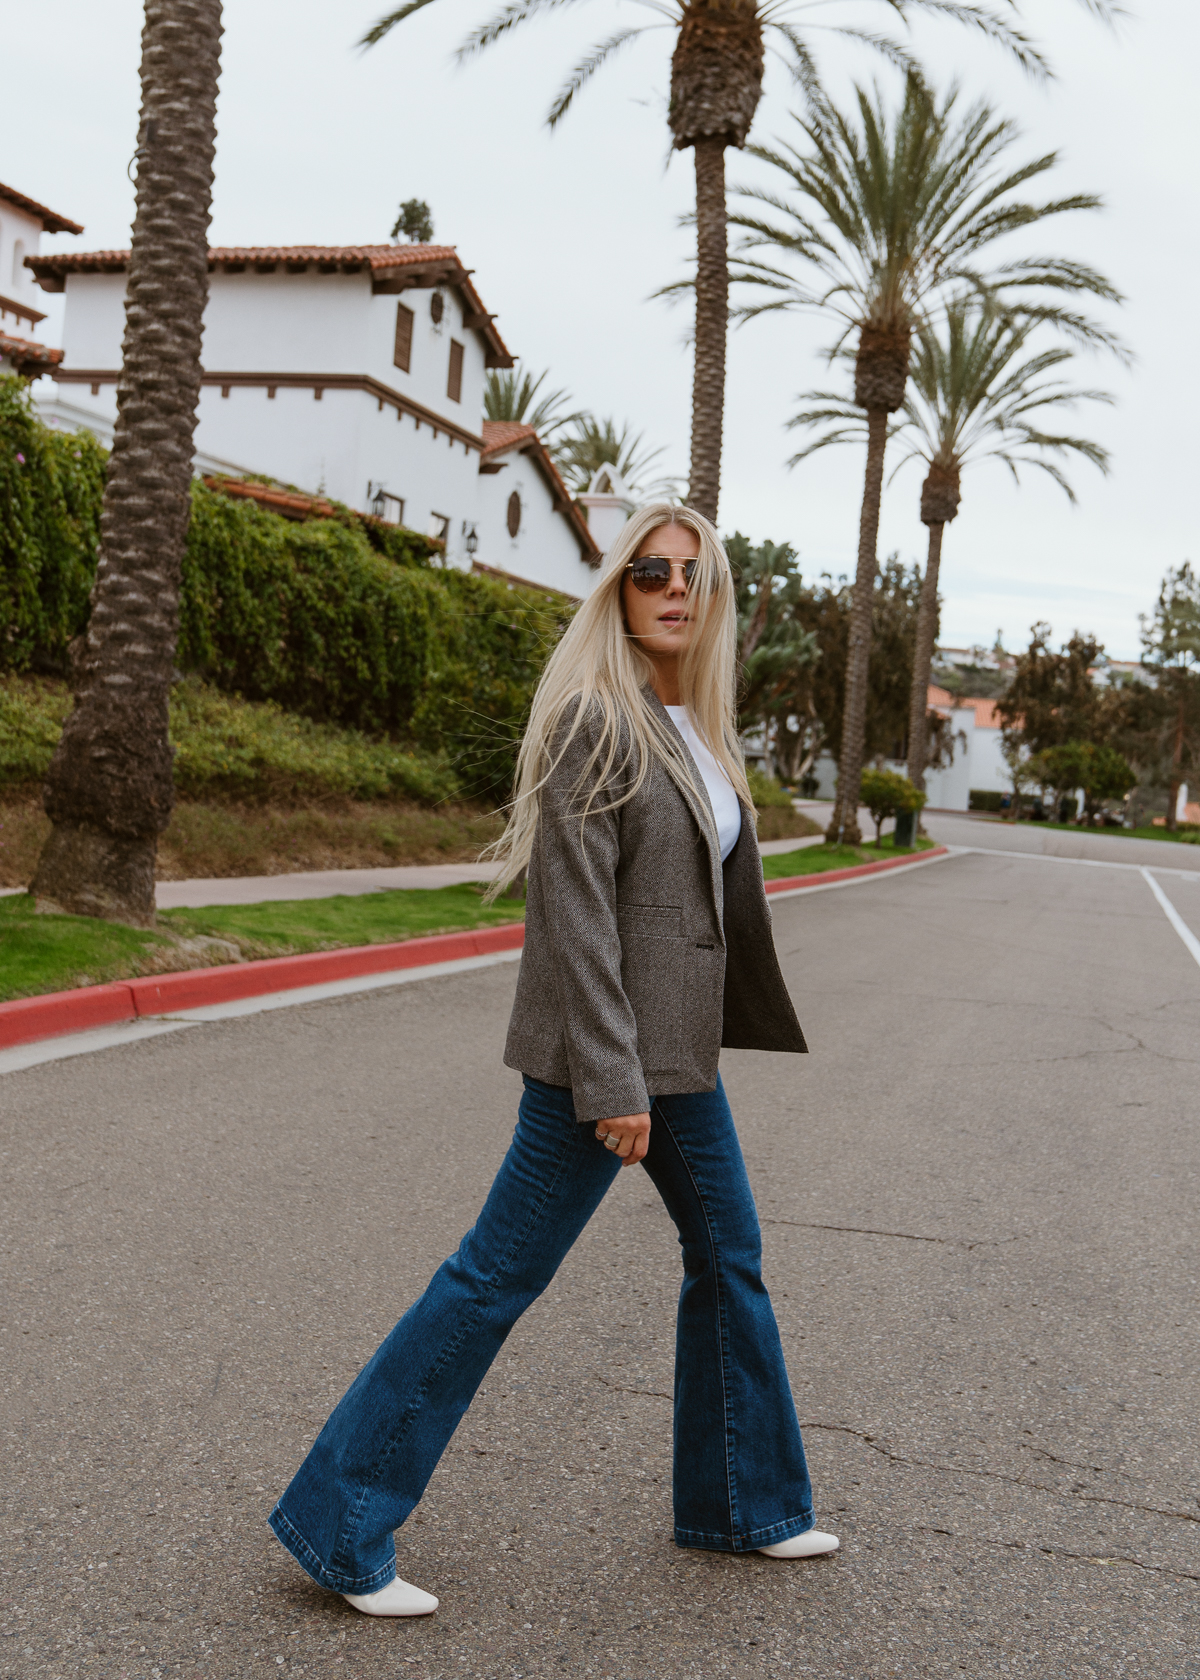 Holiday Gifting & Styles with Madewell